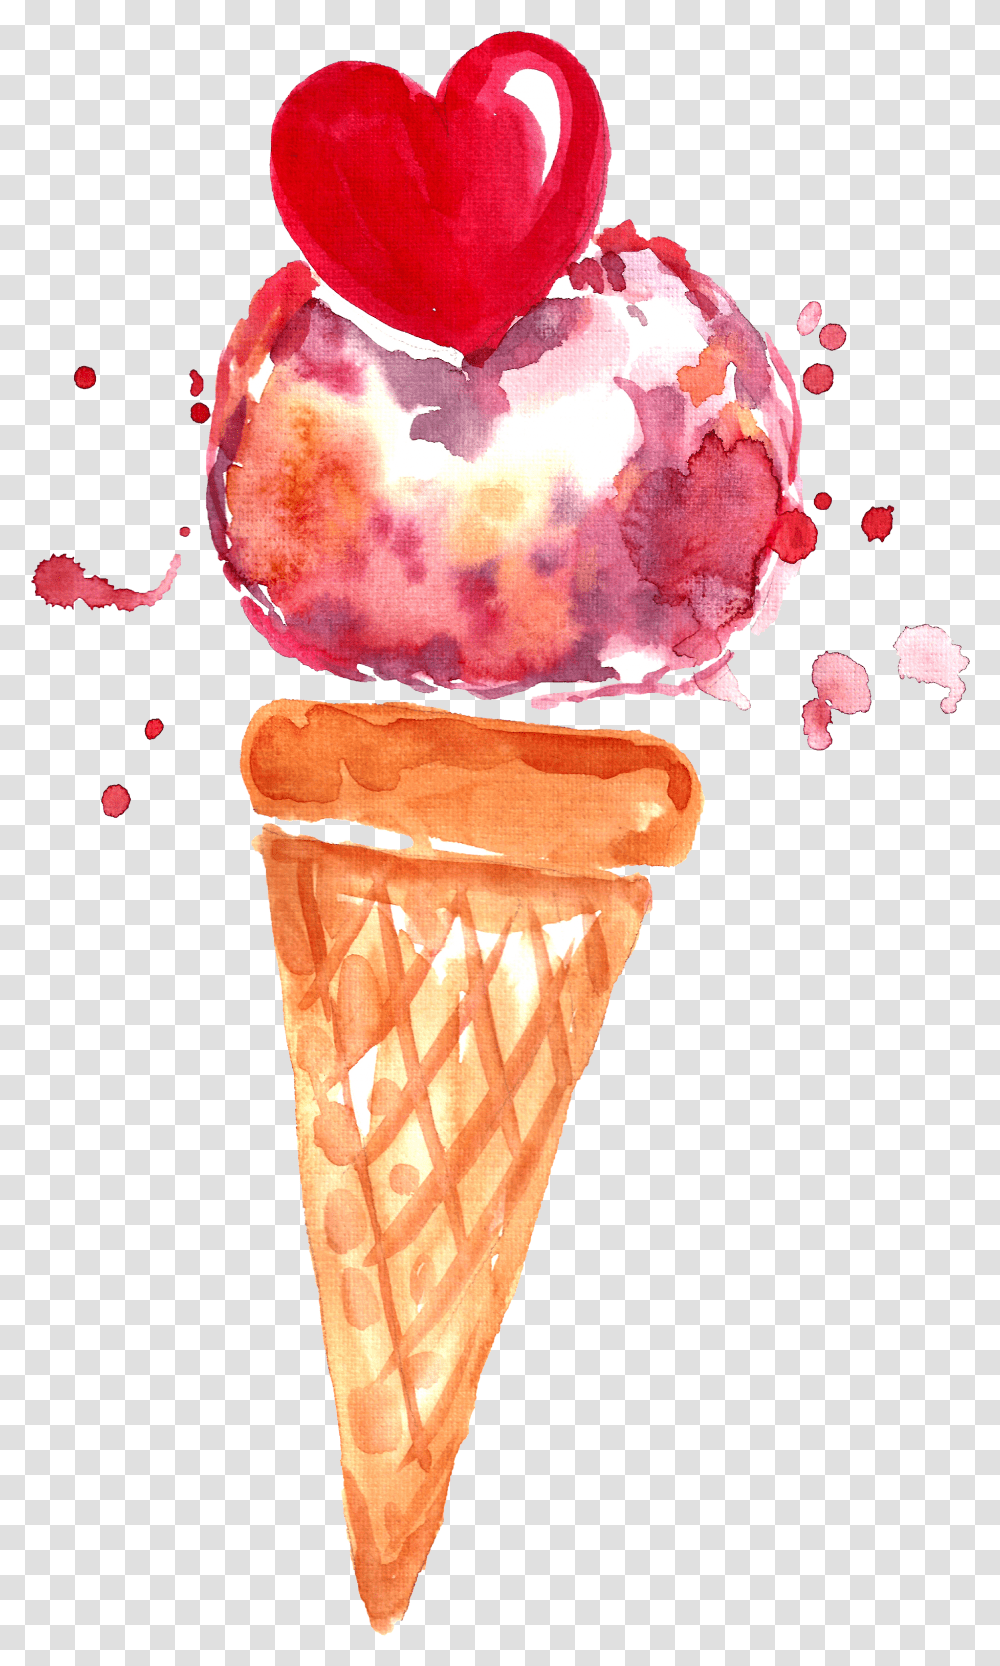 Image Is Not Available Ice Cream Cone Transparent Png